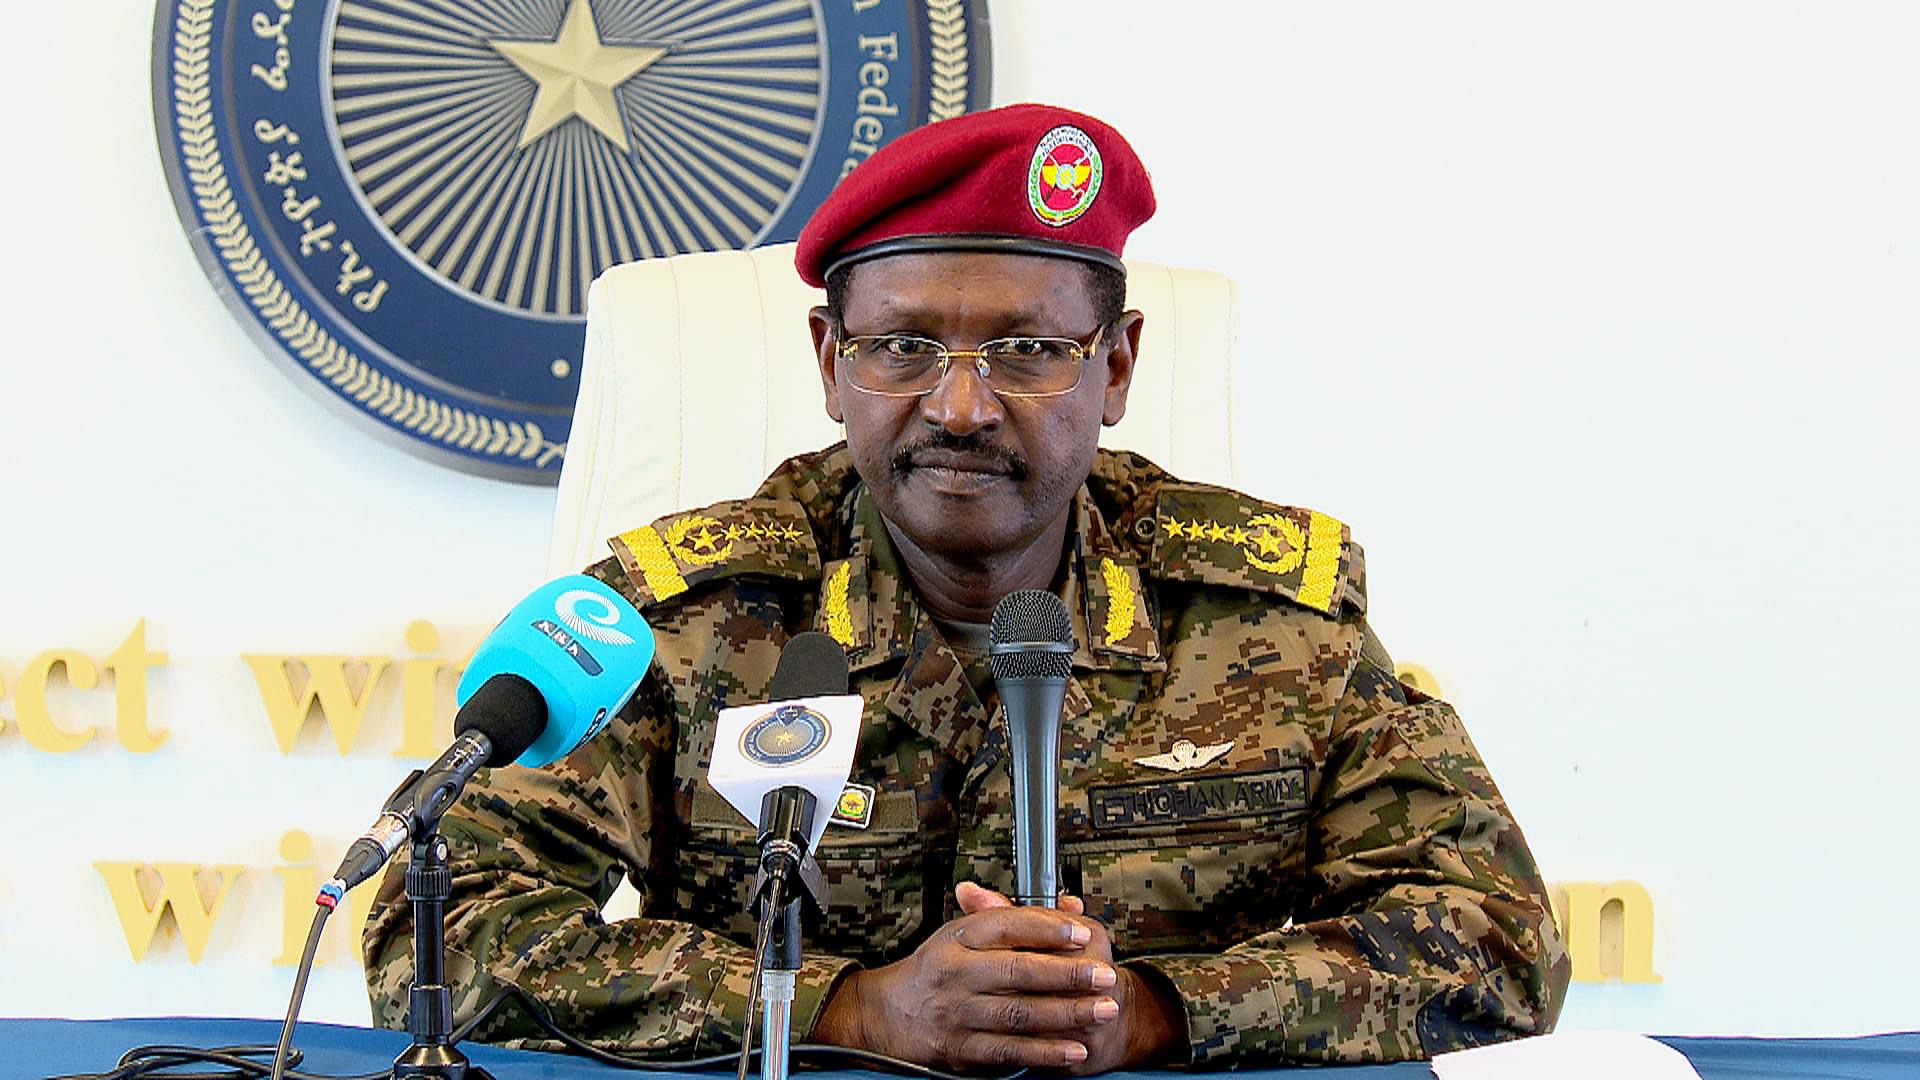 Army chief criticised over remarks on Ethiopia's role in Somalia